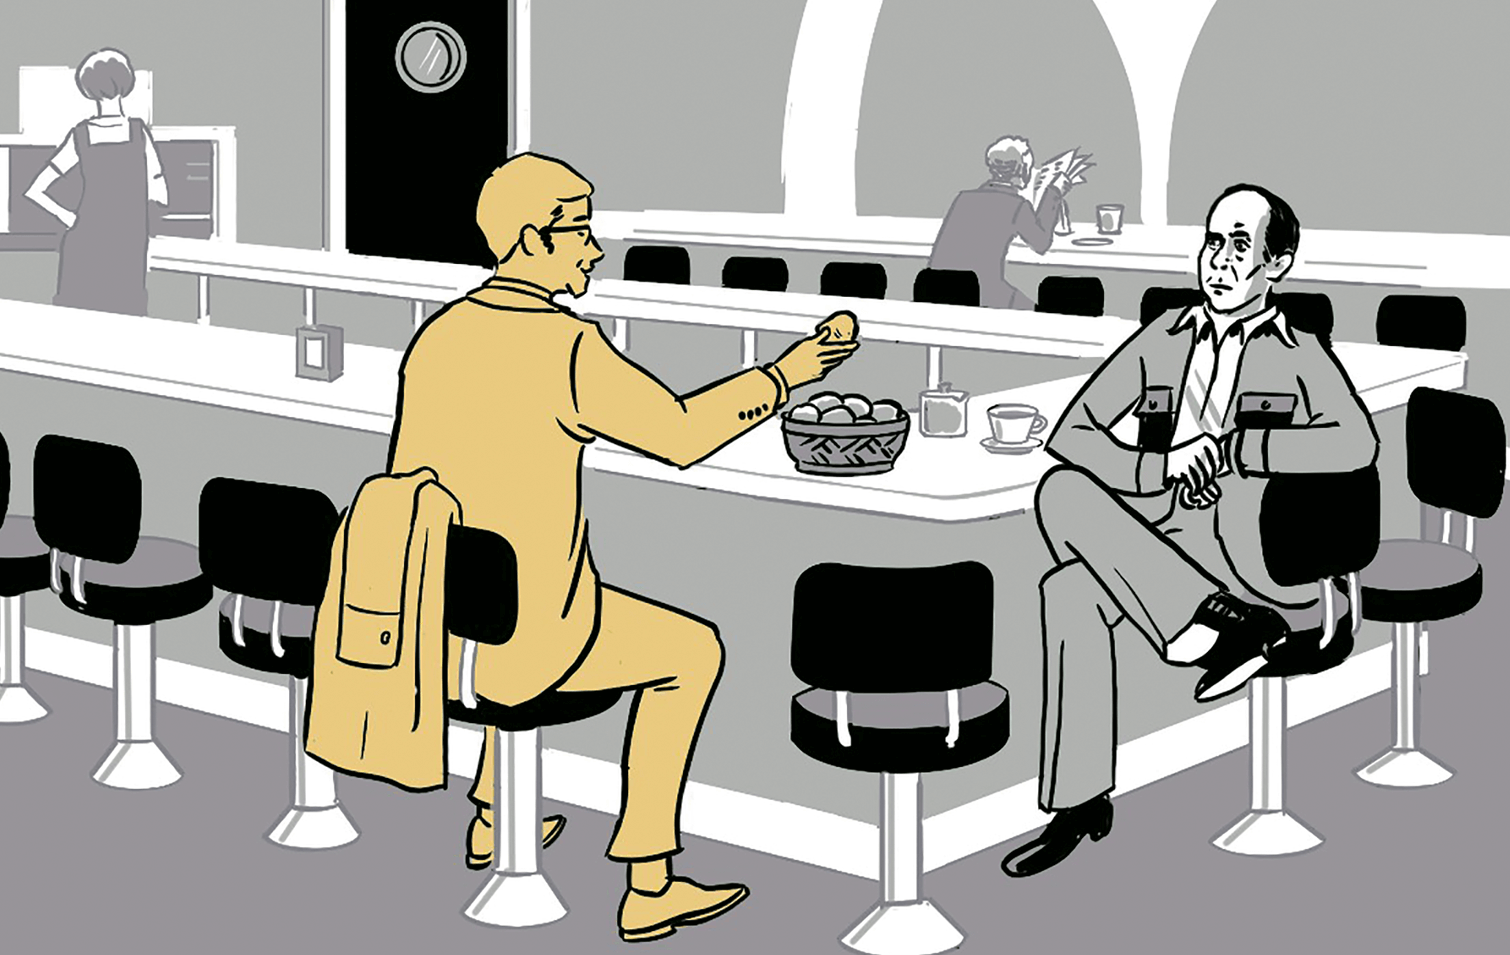 Jerome sits with Herbert Behrens at a lunch counter. He says: I’ve been thinking. What if we could do more than just look up holding and prices?